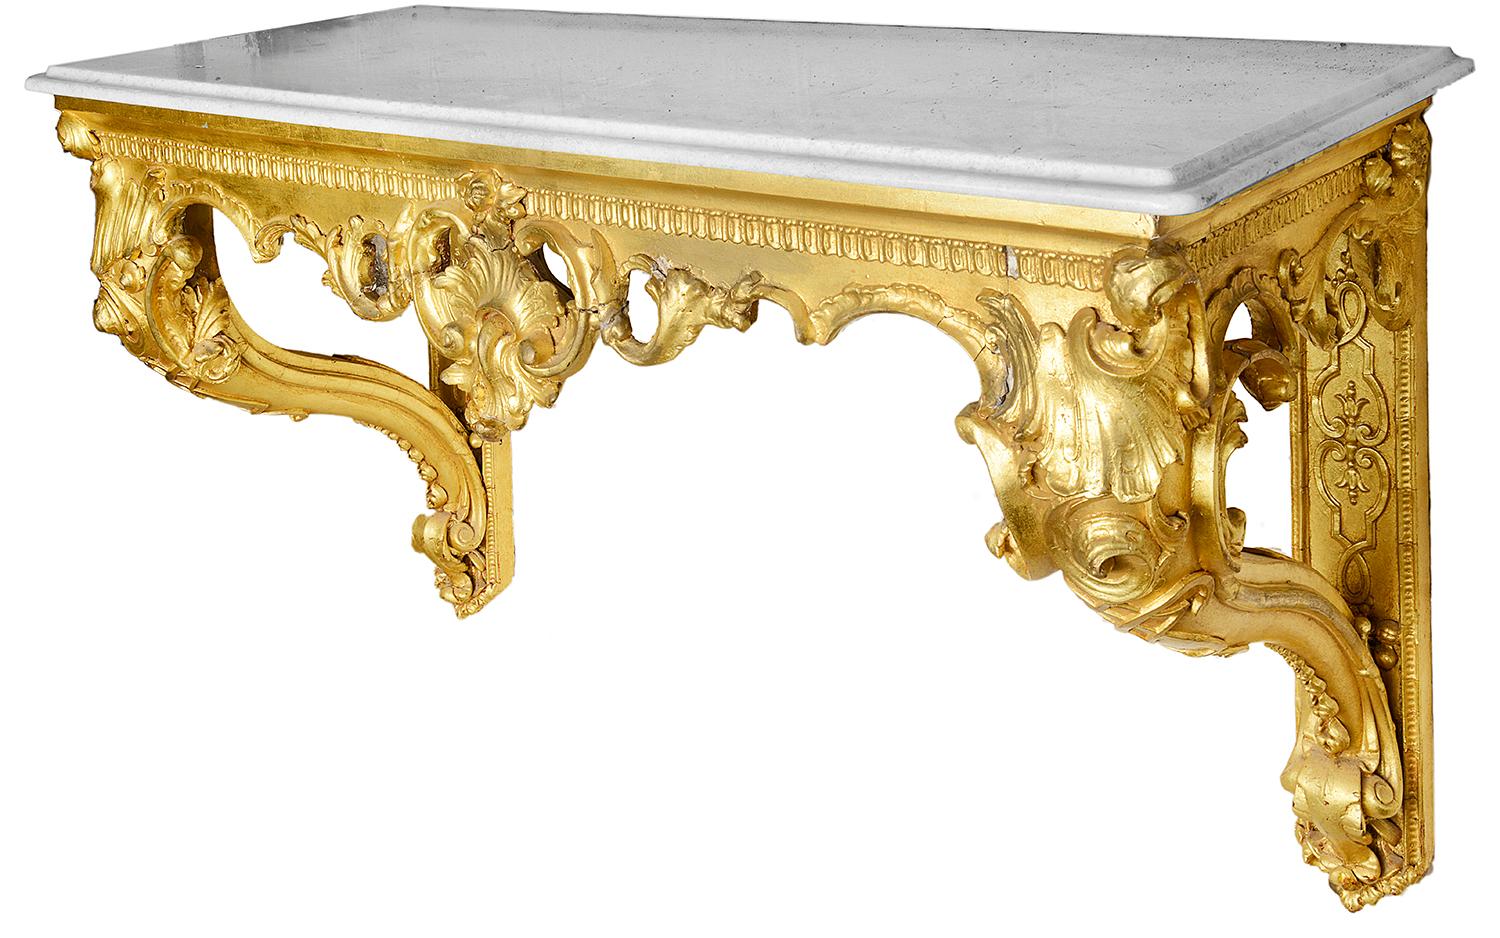 A pair of 19th century gilded wood and gesso console tables, each with their original white marble tops, scrolling cabriole supports to either end and classical C scroll and foliate decoration to the frieze.